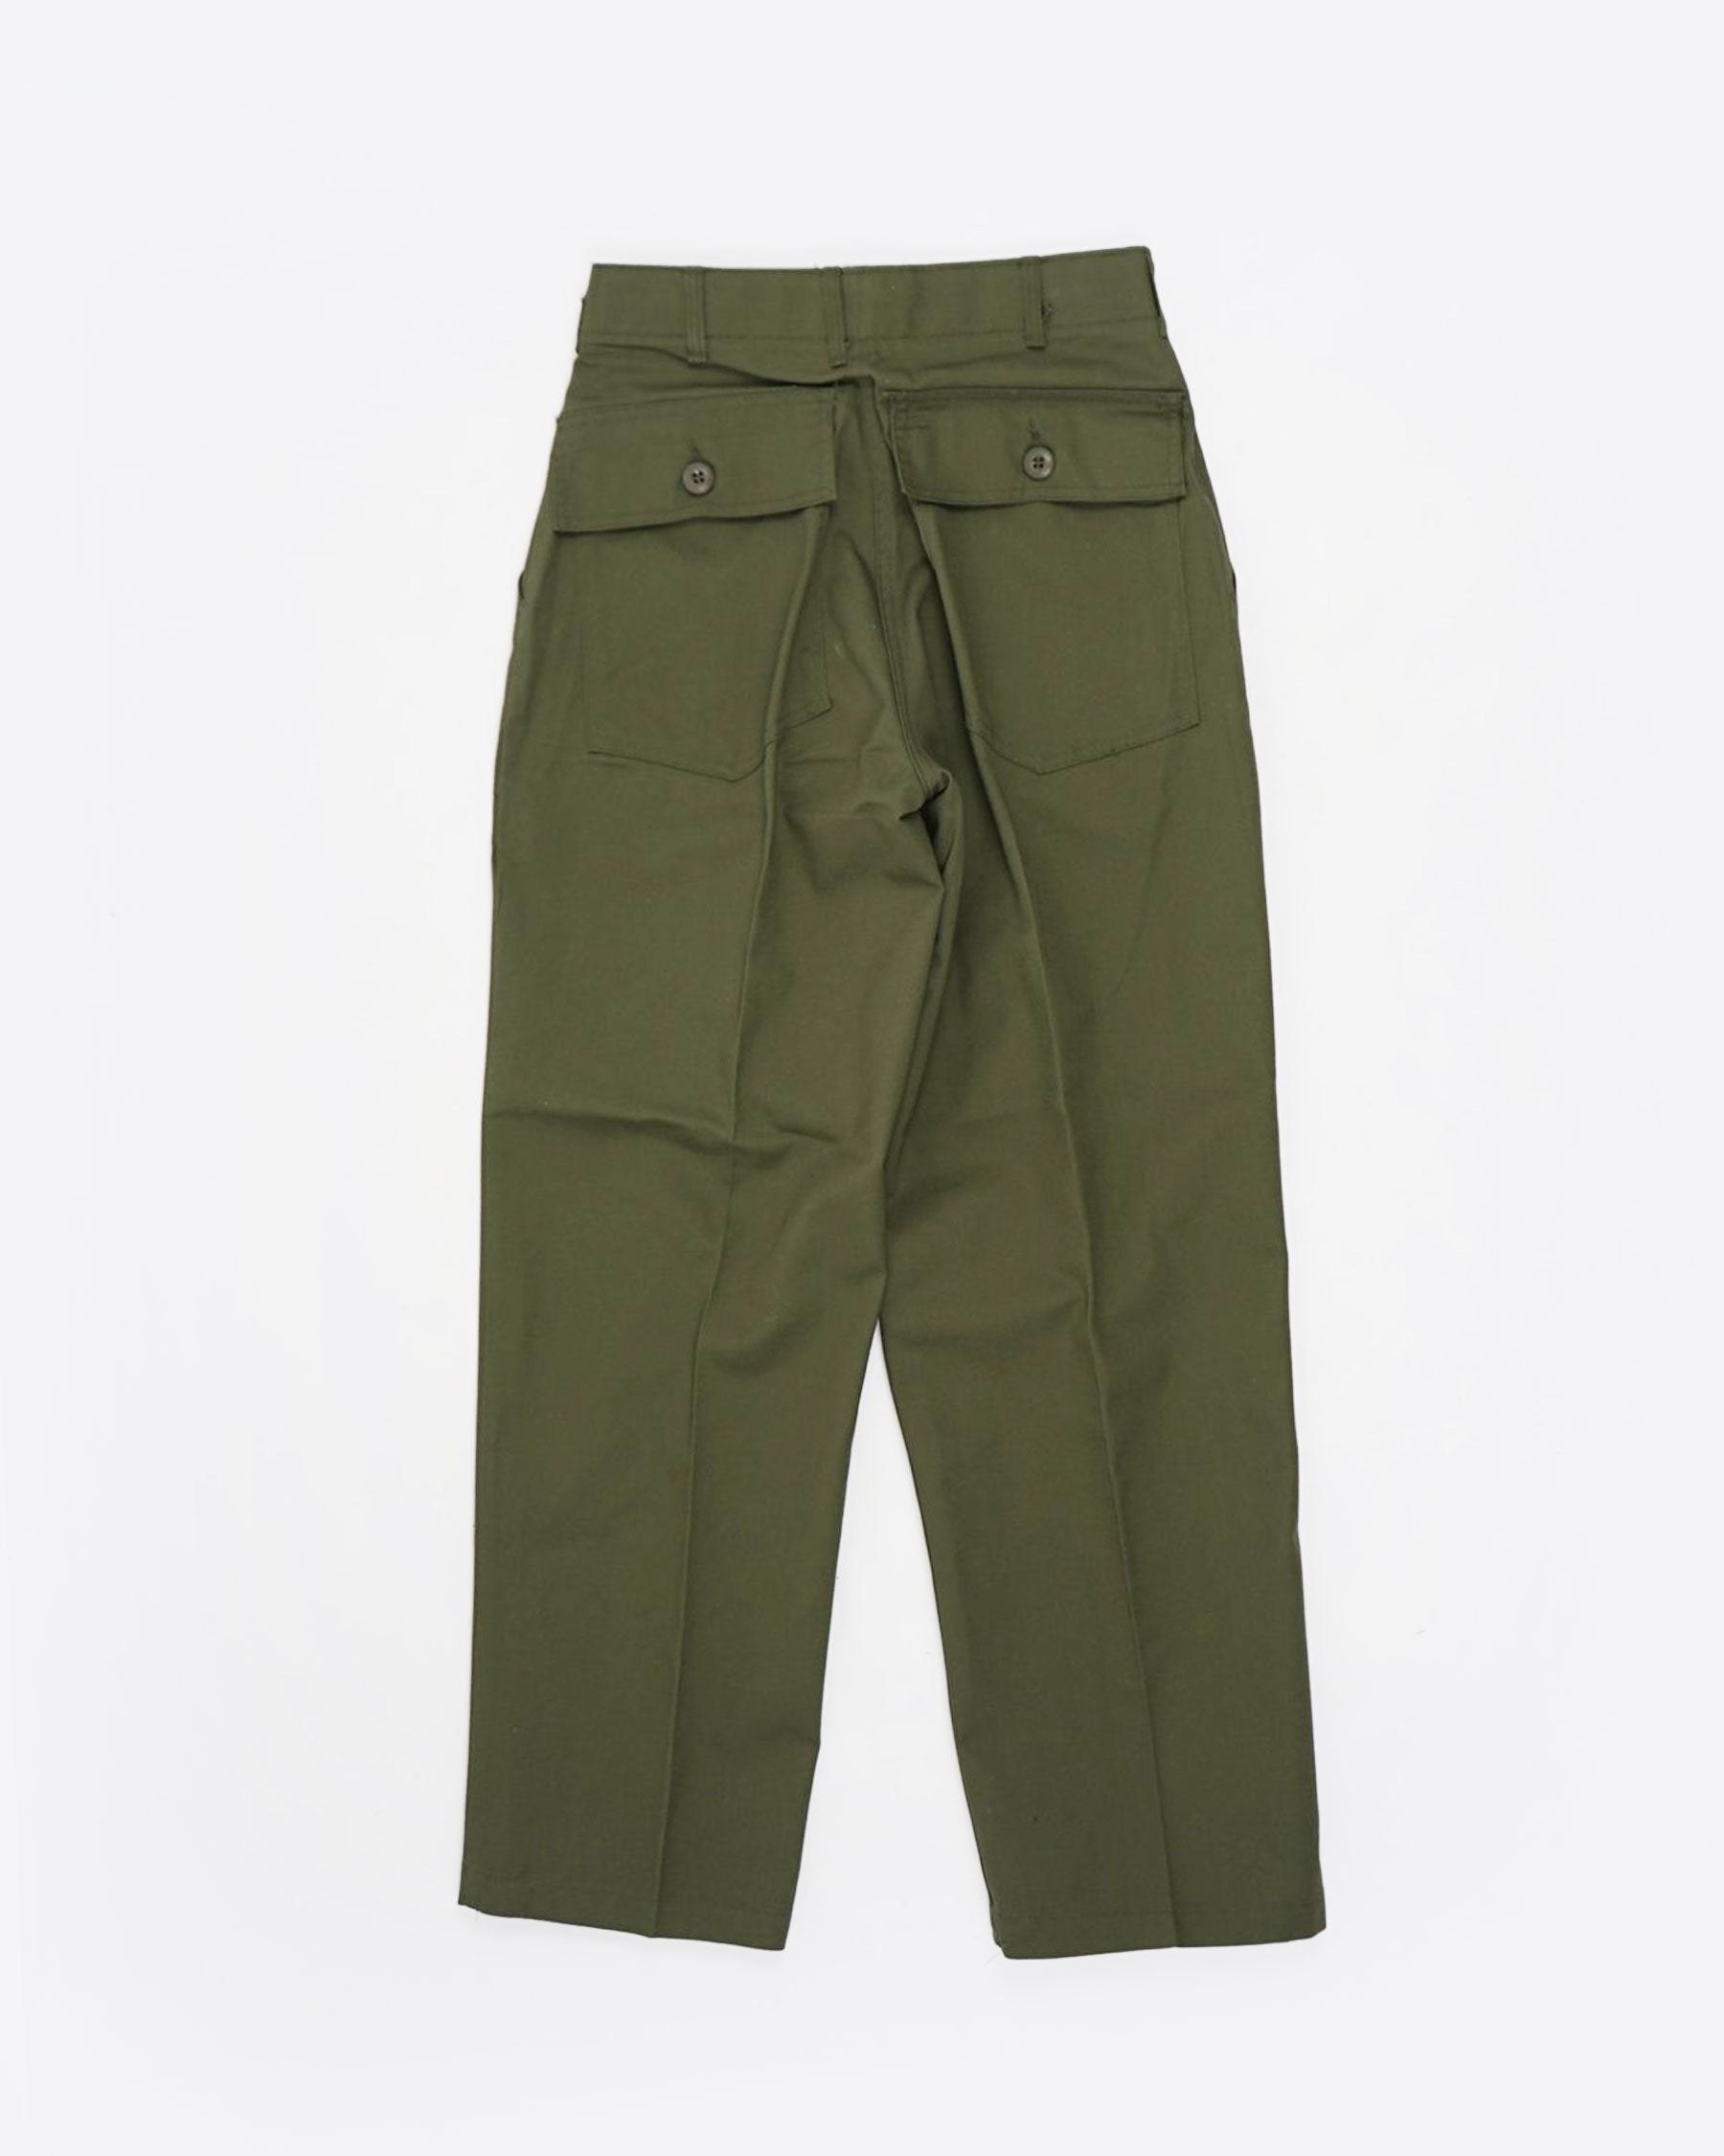 U.S. Military Utility Trousers – FRONT